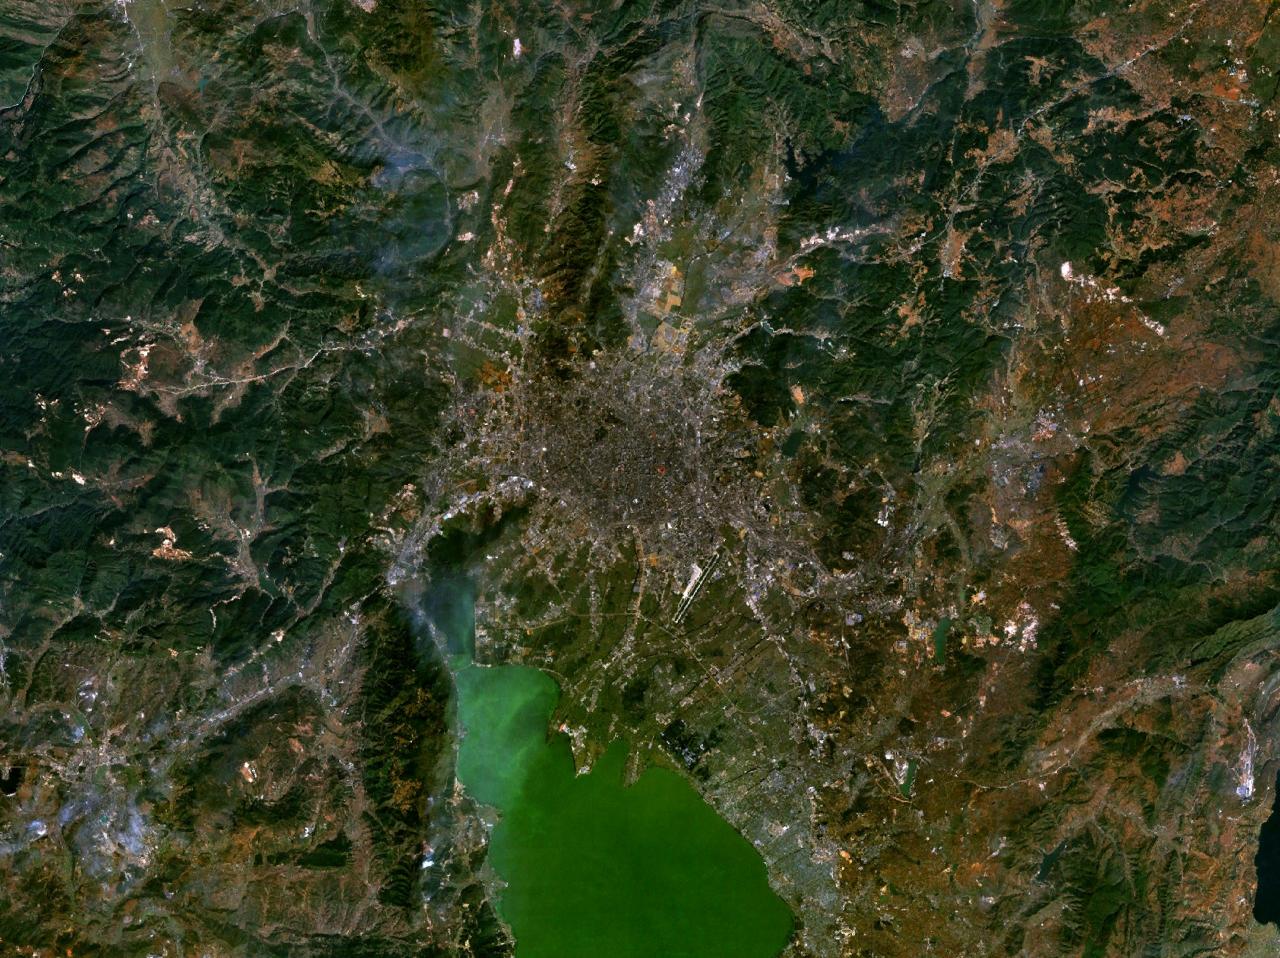 Satellite image of Kunming situated at northern point of Lake Dianchi Source: Wikimedia Commons, Kunming 102.71986E 25.03390N.jpg